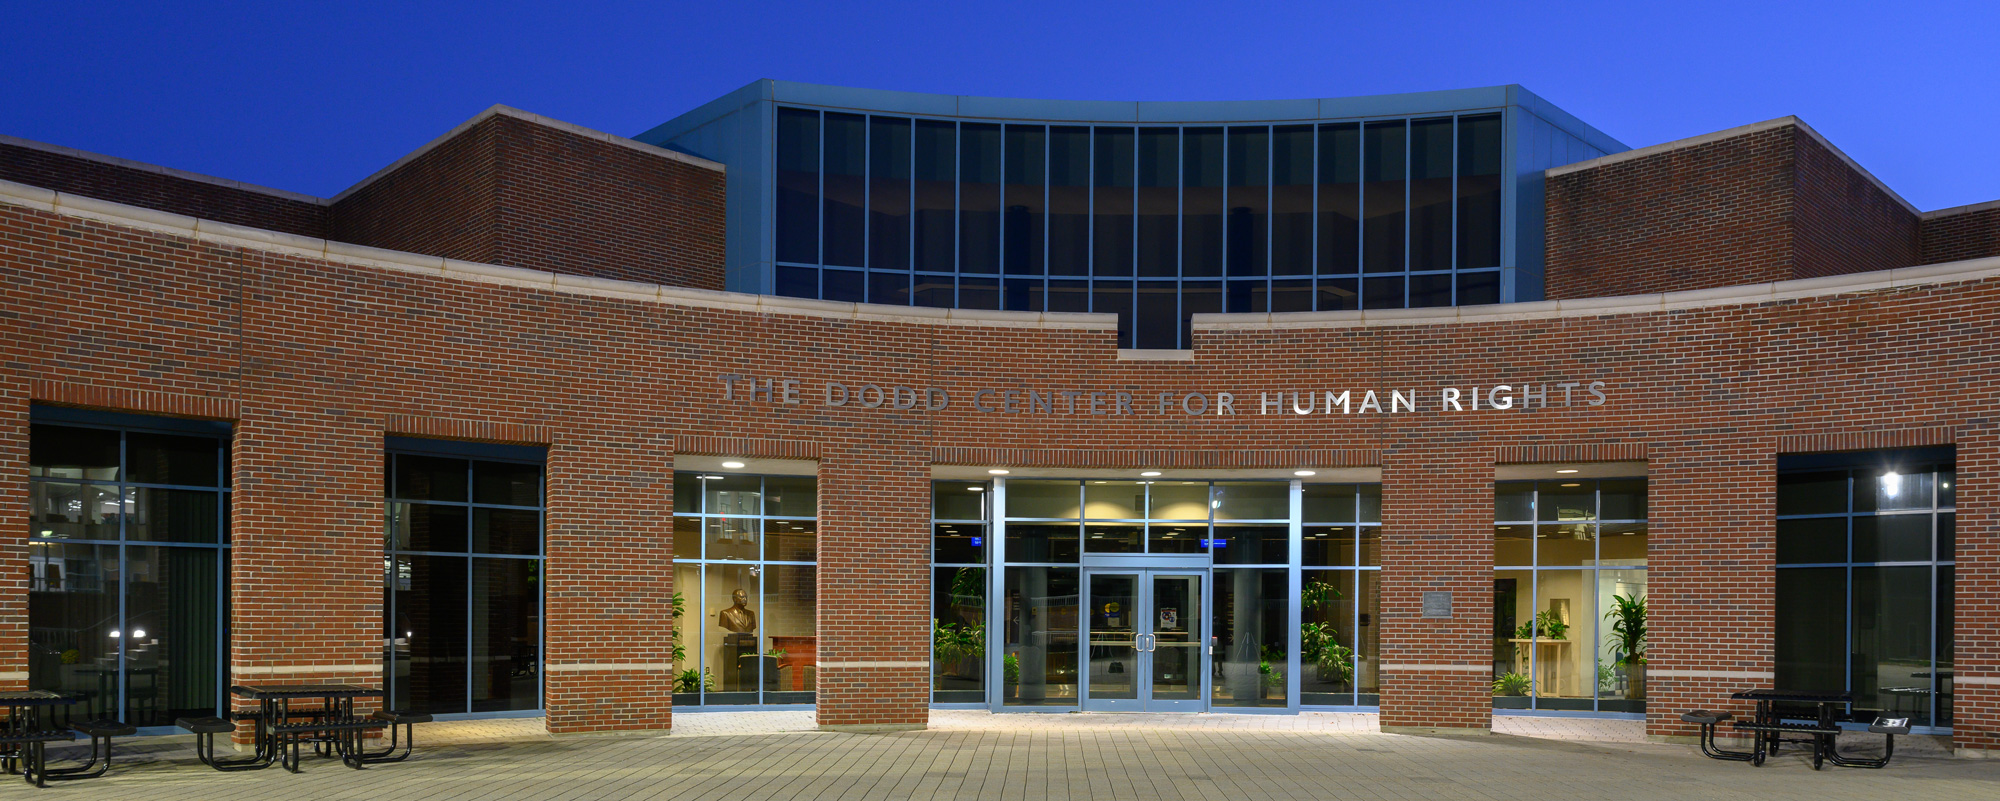 The Dodd Center for Human Rights building at dusk